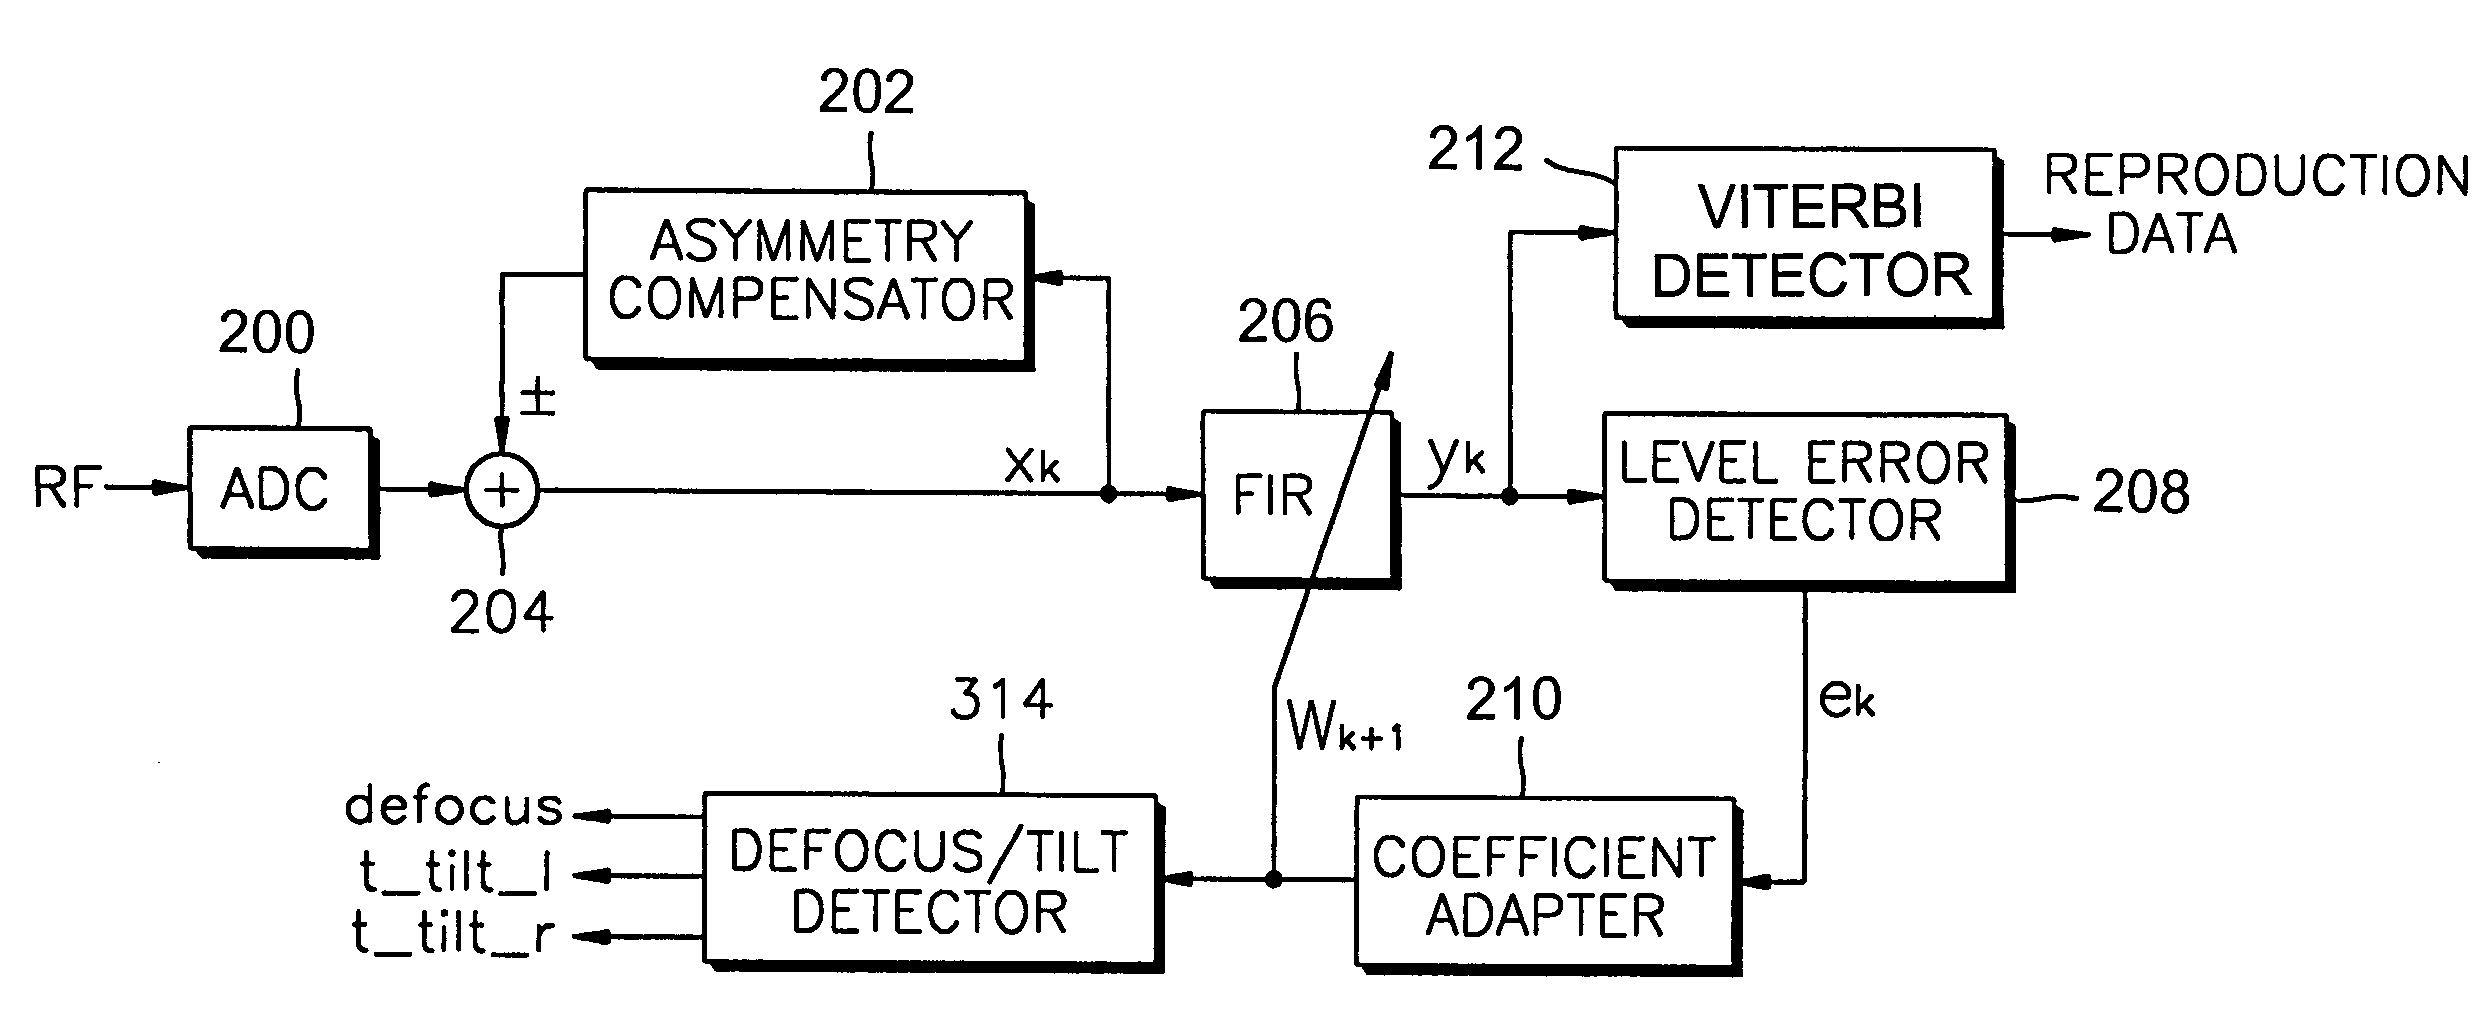 Data reproduction apparatus and method with improved performance by adjusting filter coefficients of equalizer